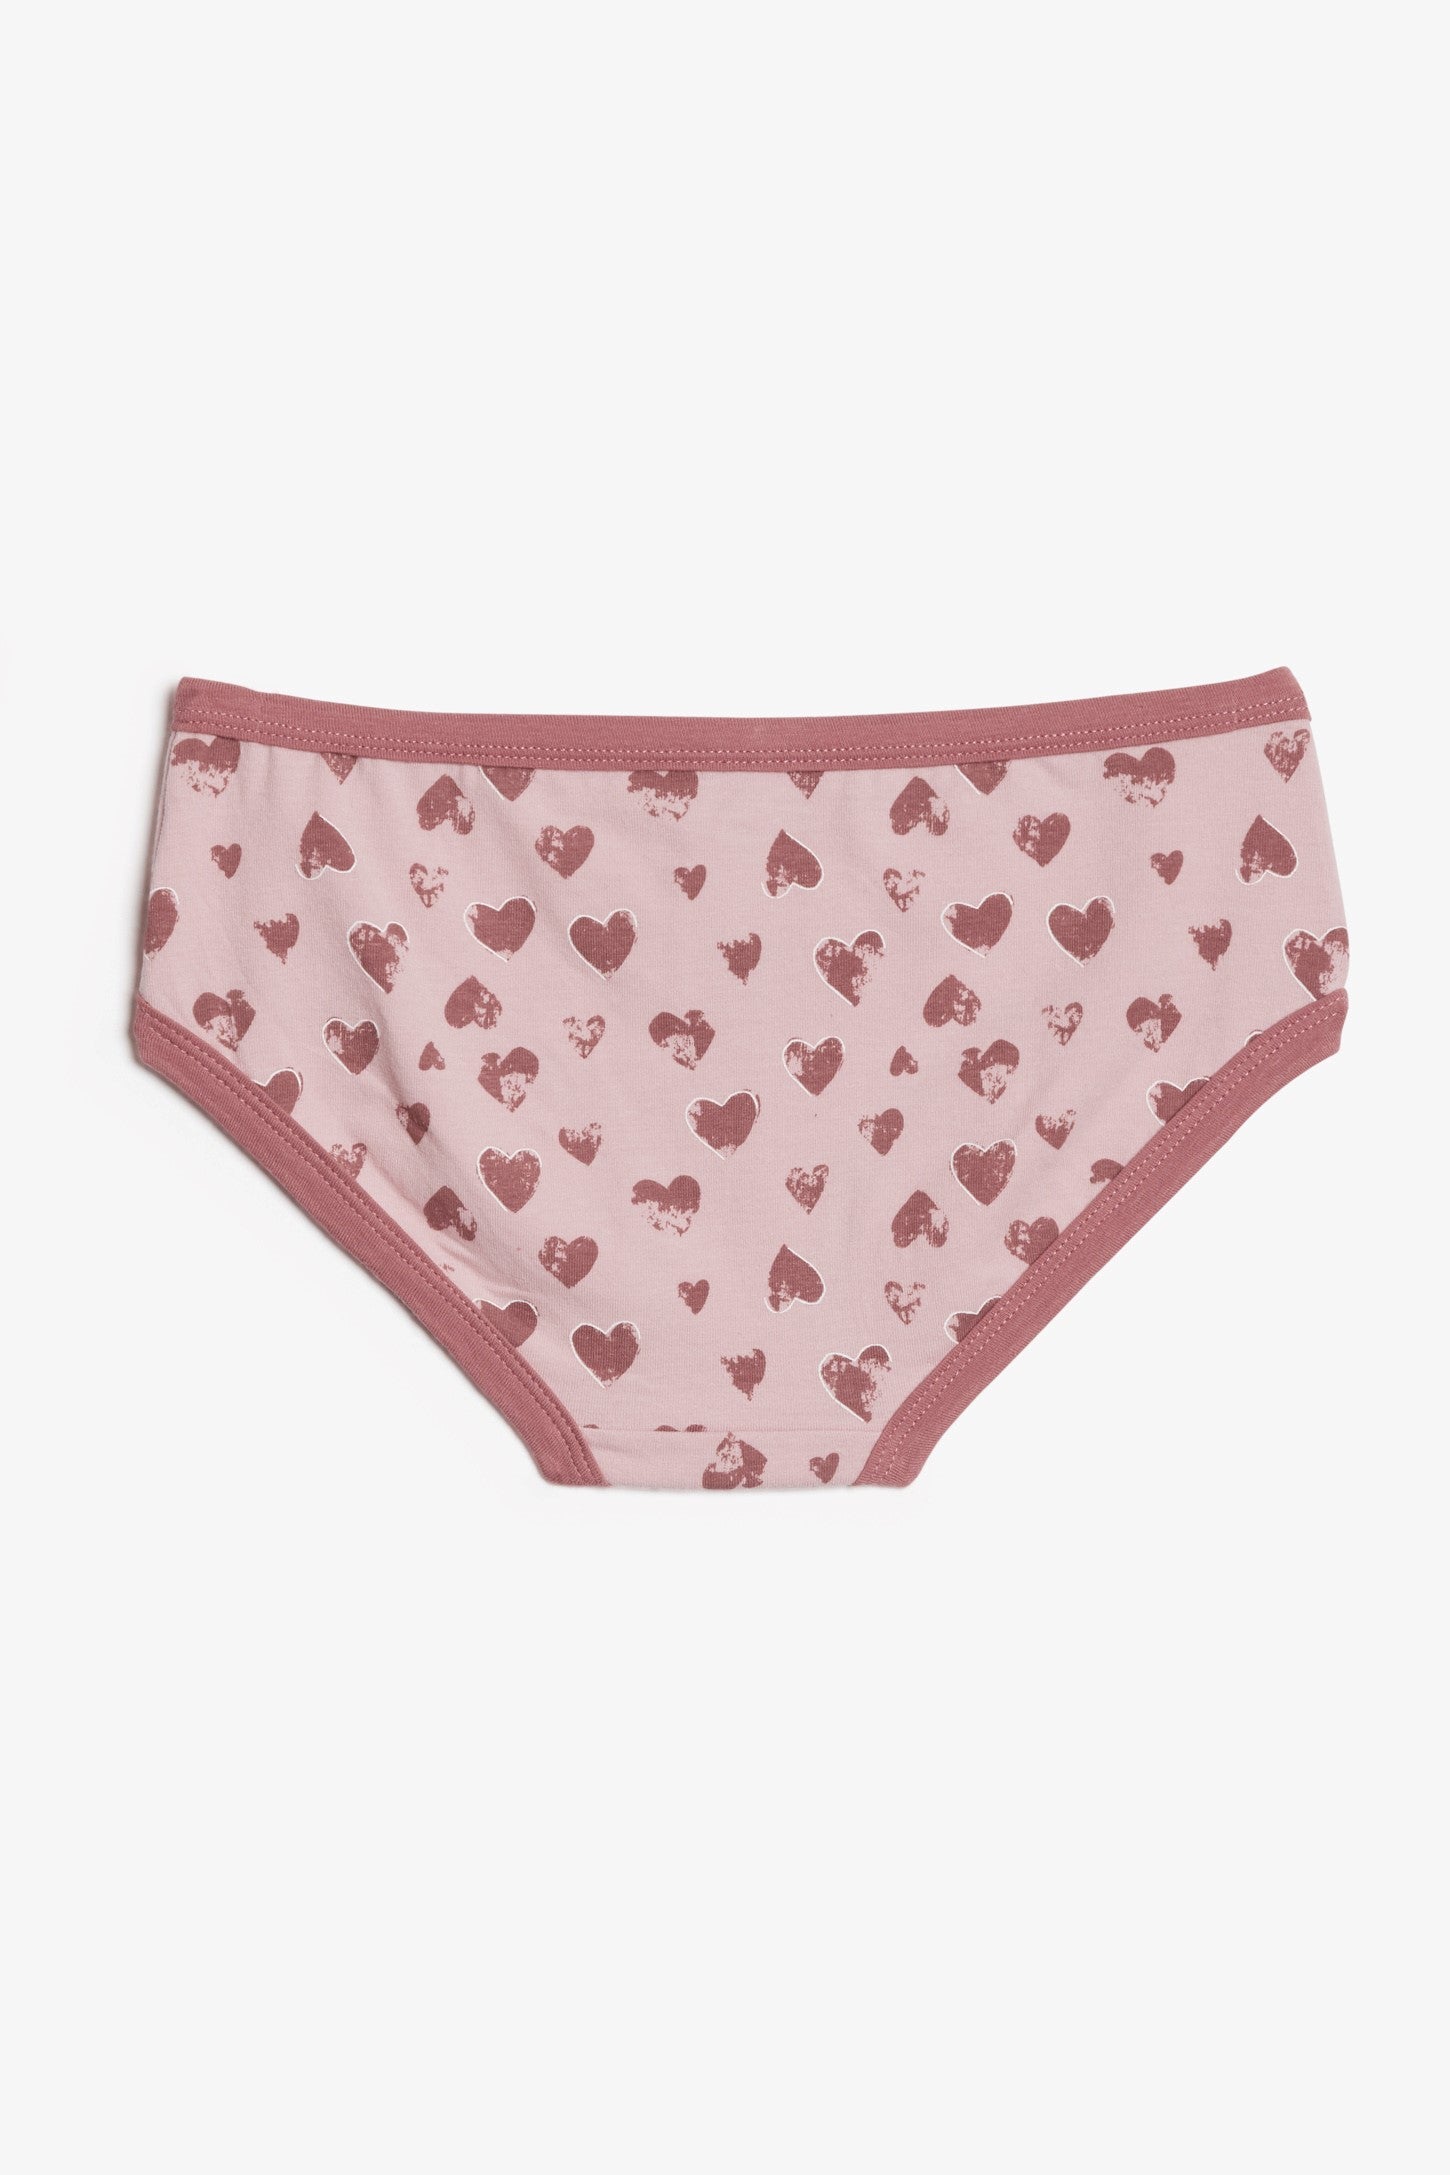 Culotte Hipster, 3/15$ - Ado fille && ASSORTIES ROSE